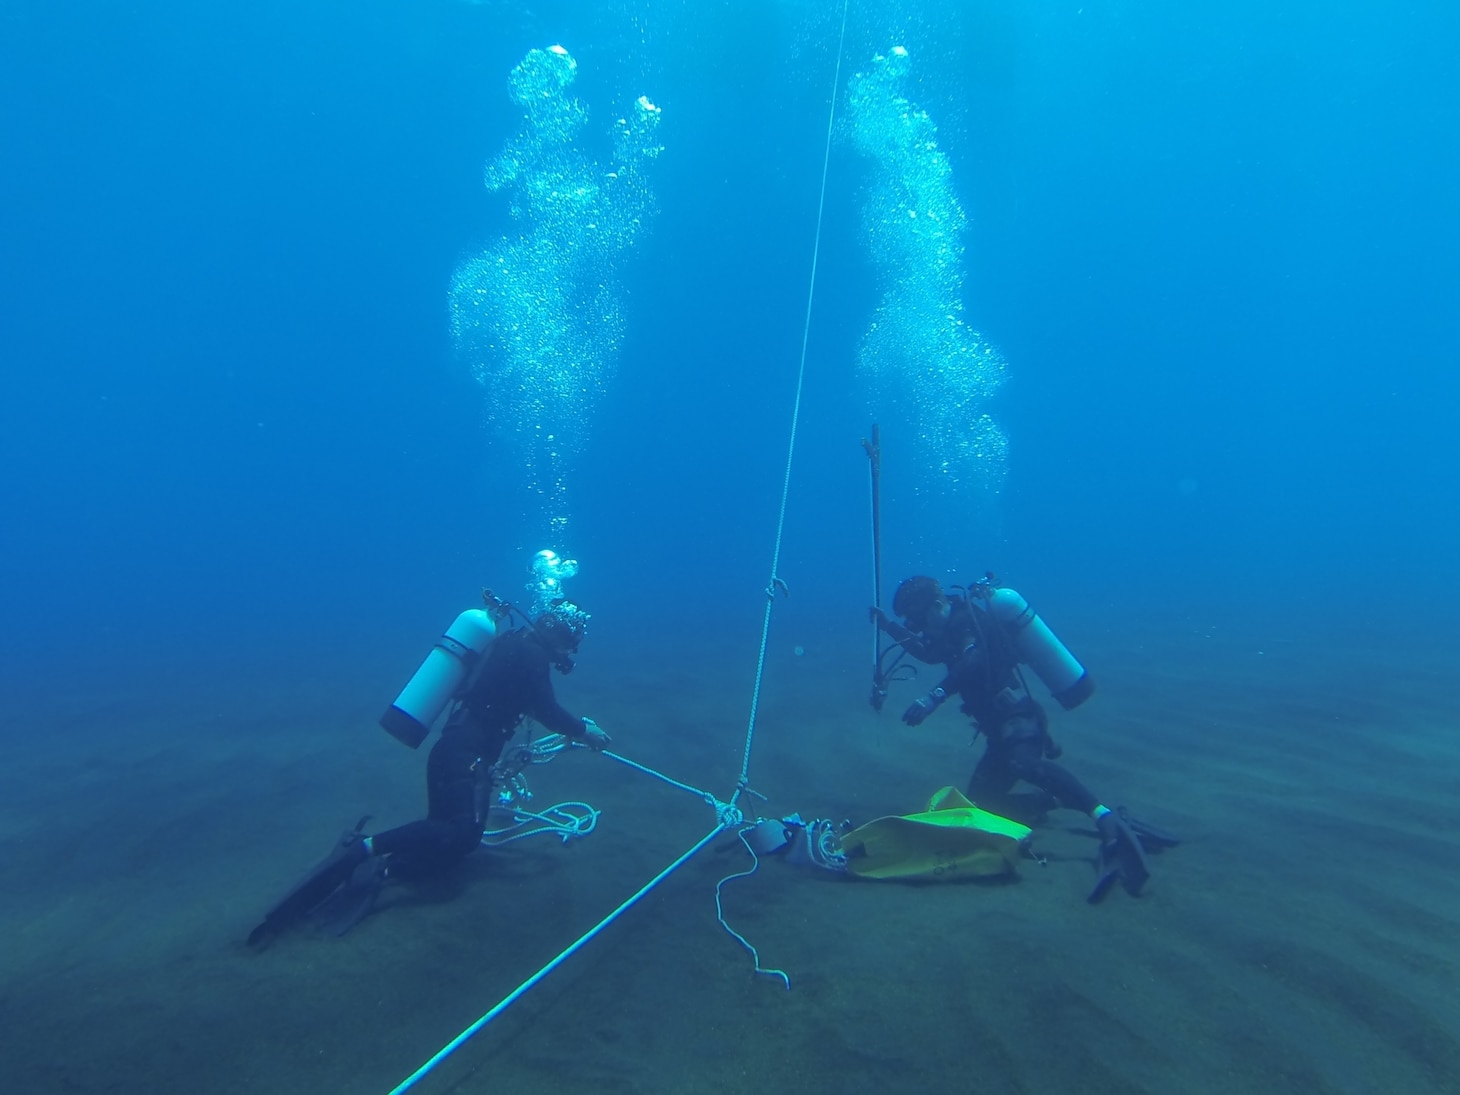 IWO TO, Japan (June 18, 2019) Explosive ordnance disposal technicians assigned to the Japan Maritime Self-Defense Force (JMSDF) and the U.S. Navy participate in a live bottom mine contact charge demonstration during IWOTO 2019. IWOTO 2019 is one of the largest live mine countermeasures exercises conducted in the entire world, providing personnel with the opportunity to conduct contact charges and FMRs against real mines without sensor packages.